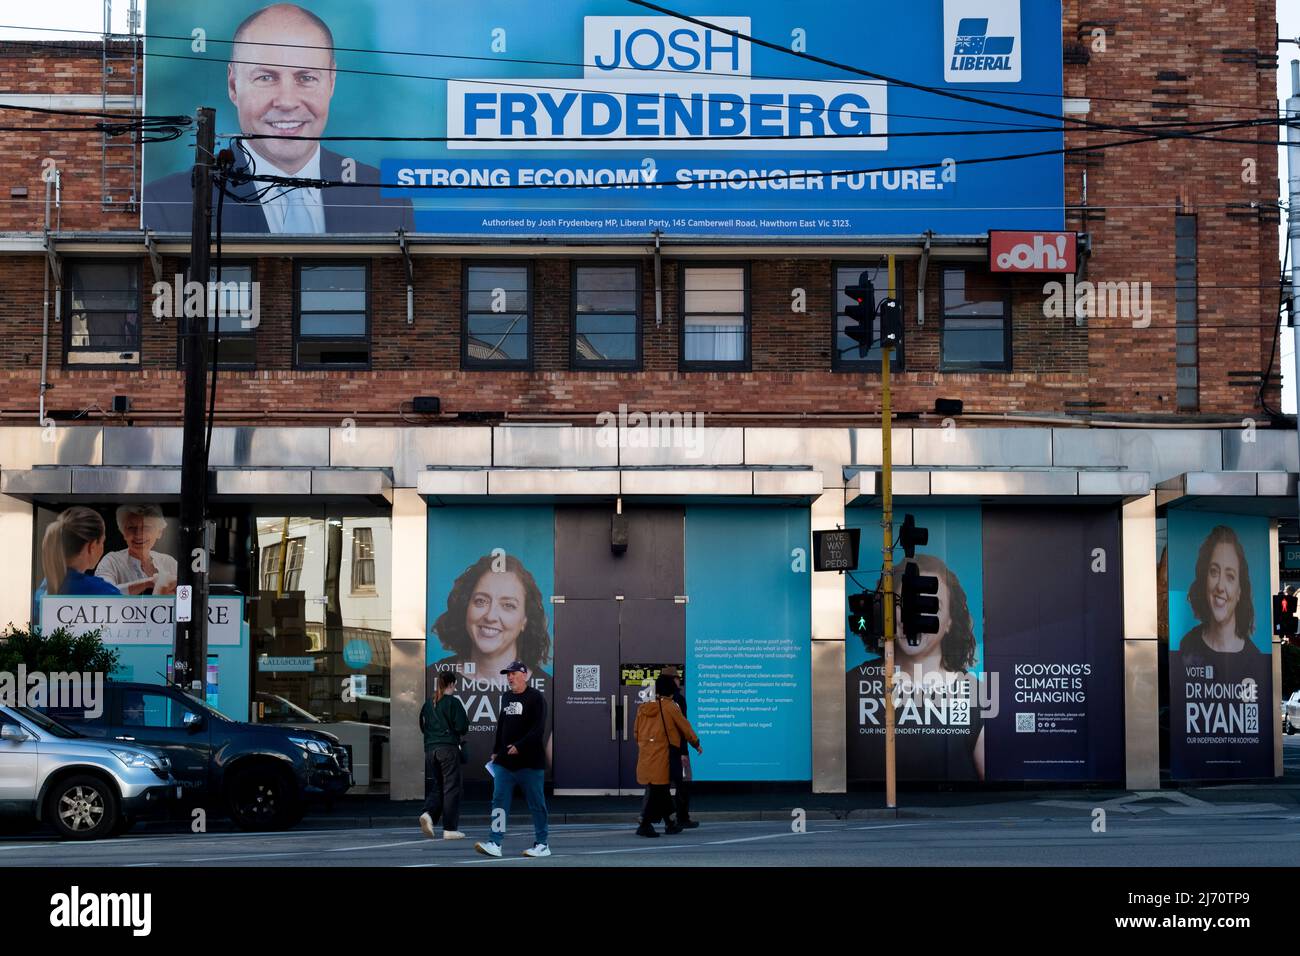 Political posters advertising Josh Frydenberg the Treasurer and his opponent Dr Monique Ryan an independent, who are contesting the seat of Kooyong in the 2022 Australian Federal elections. Stock Photo